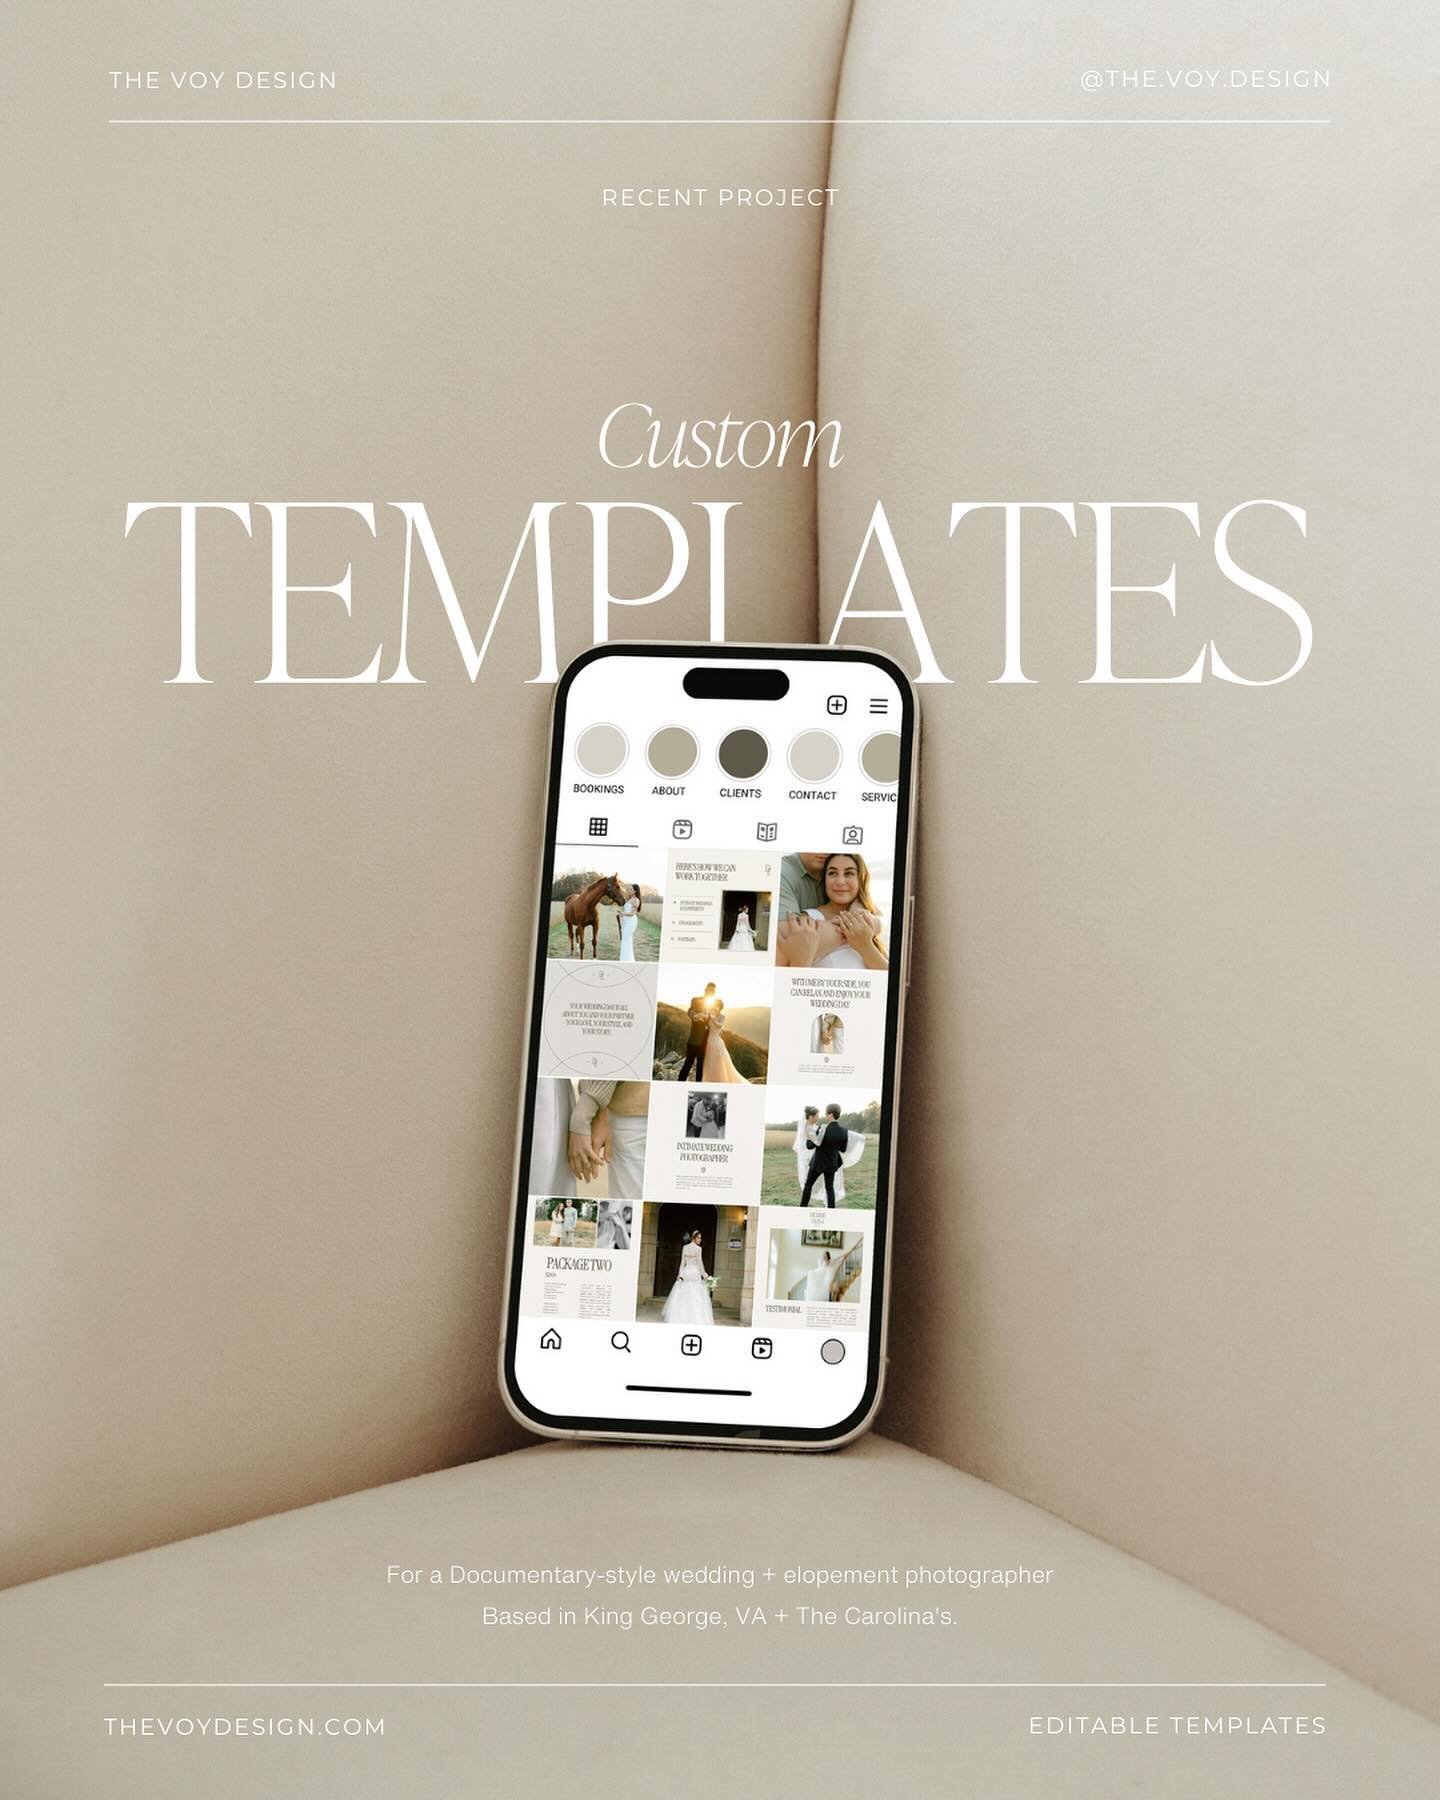 I&rsquo;m excited to introduce you my recent Instagram templates pack customly made for Debbie - documentary-style wedding and elopement photographer 📸

I have curated a collection featuring 30 posts and 30 stories templates pack, along with craftin